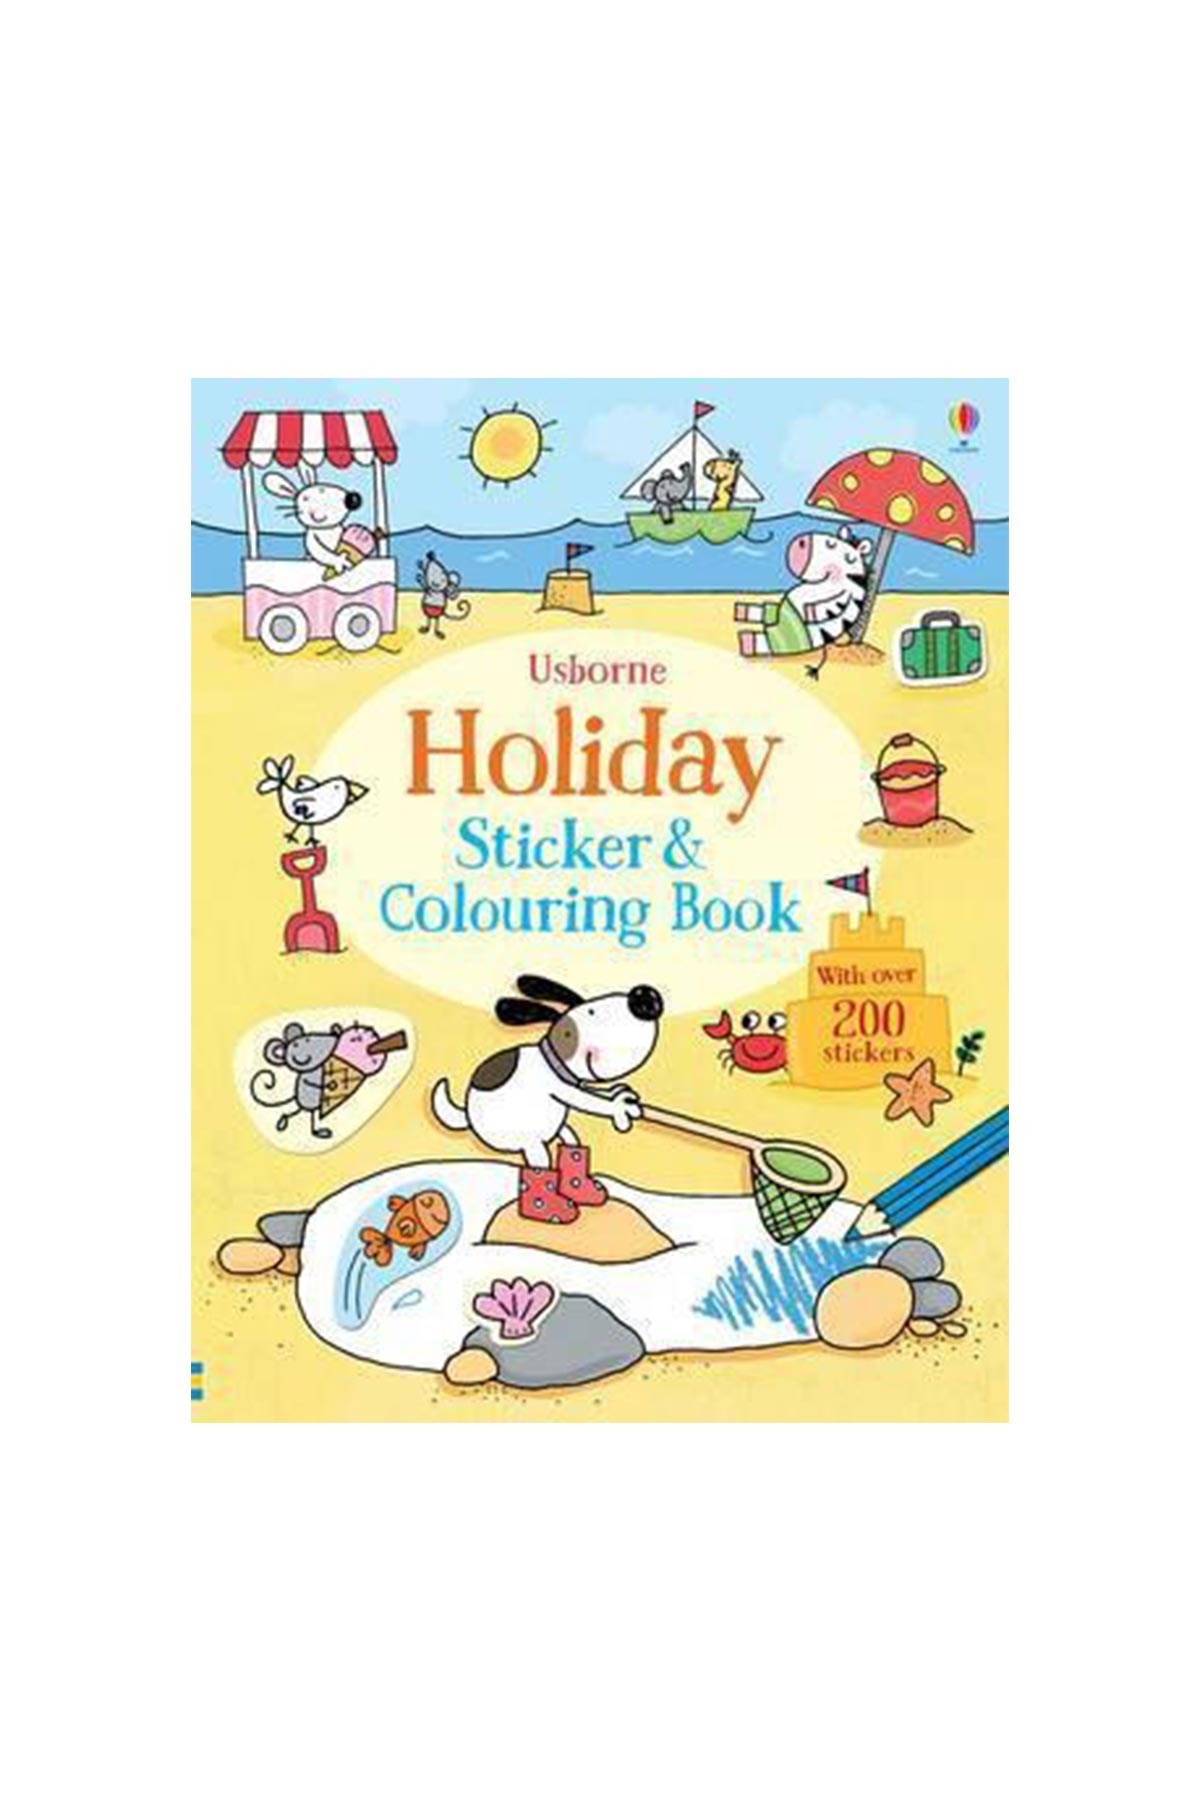 The Usborne Holiday Sticker Colouring Book